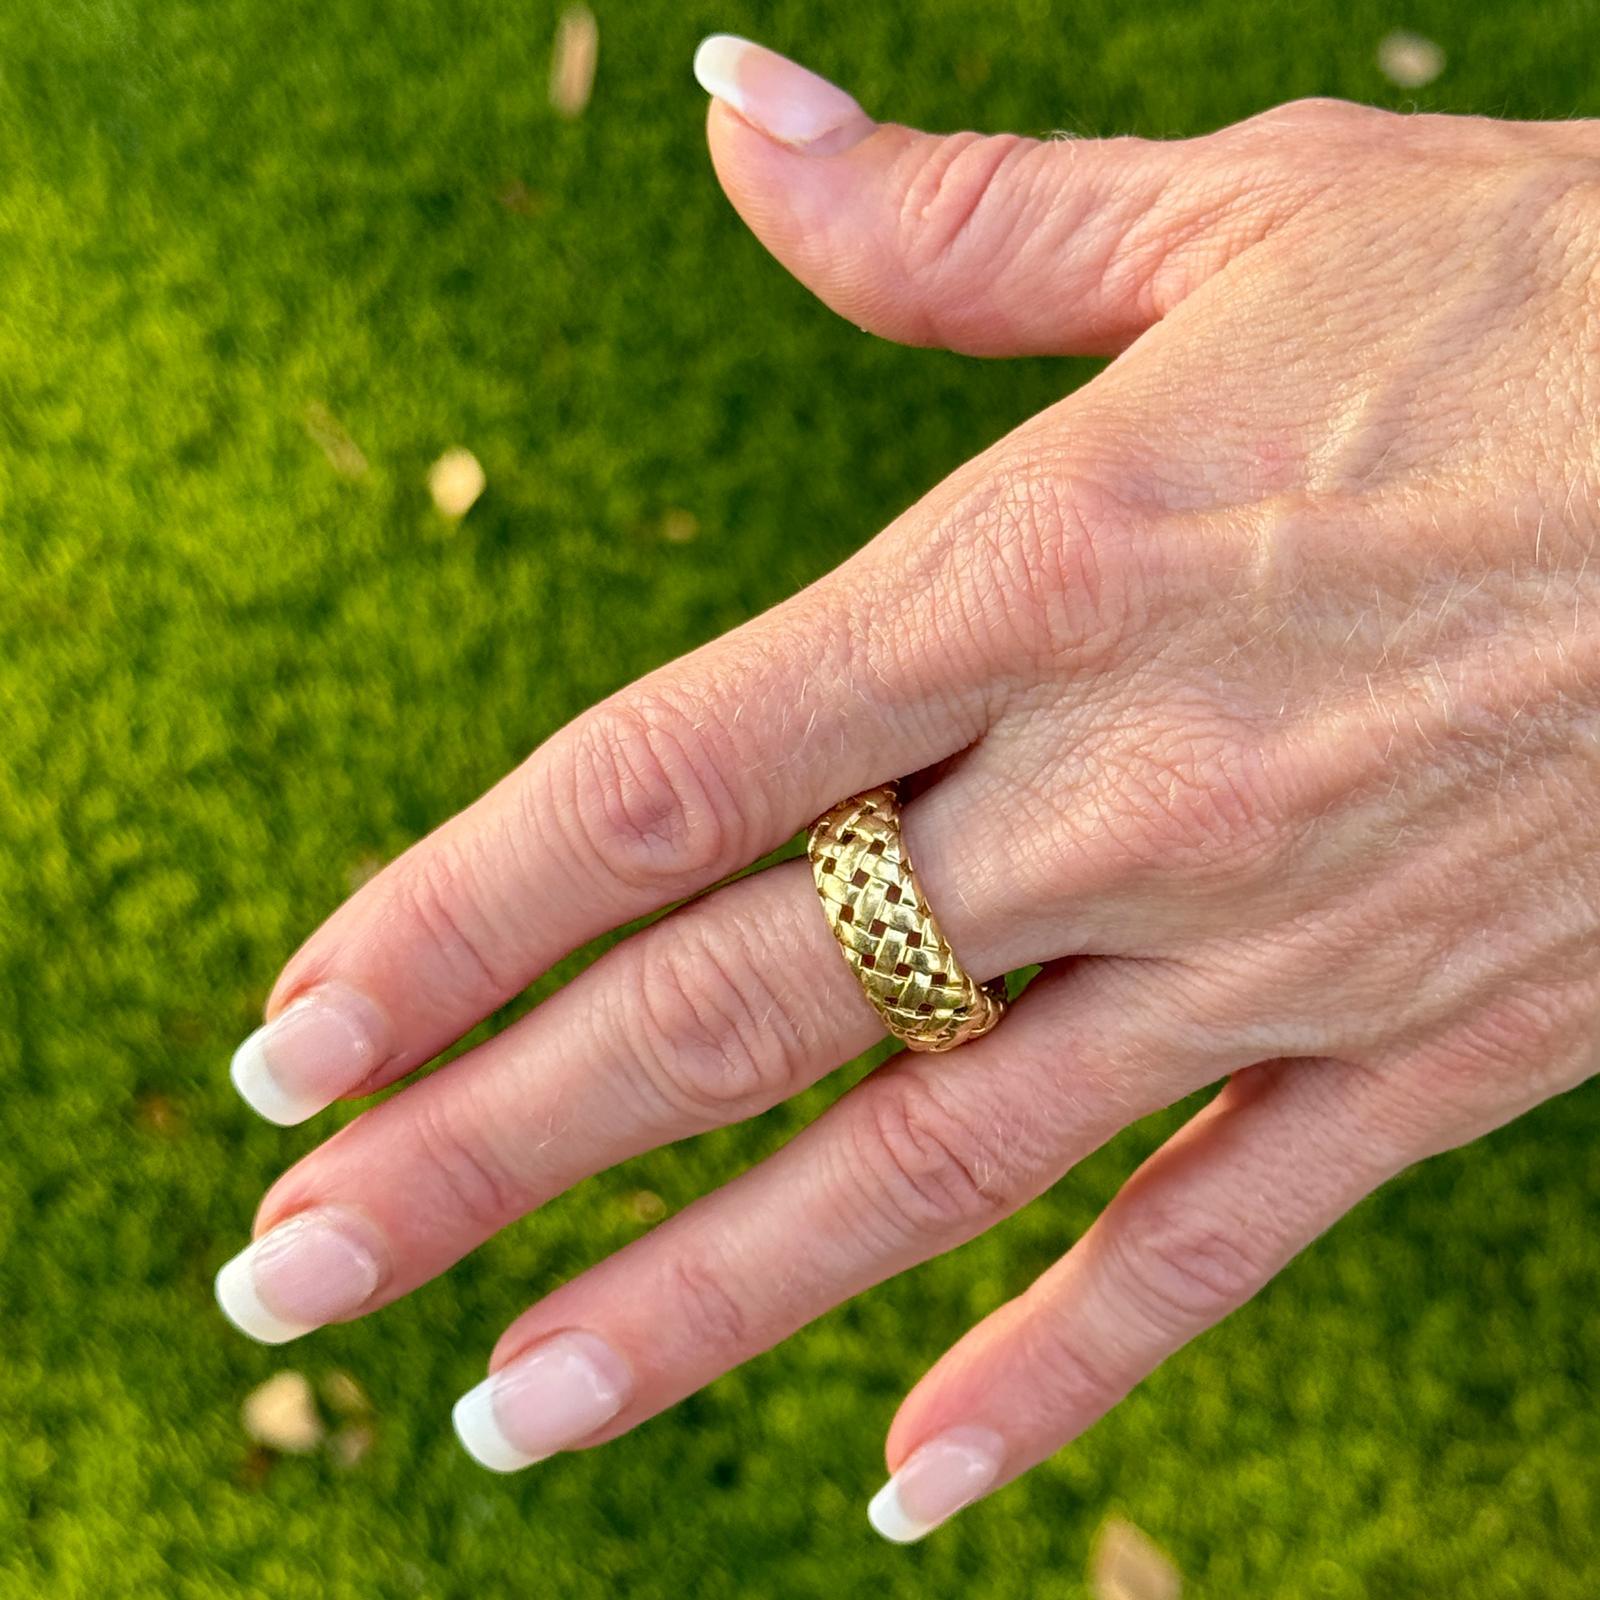 Tiffany & Company vintage band ring features a unique basket weave design that adds texture and dimension to the band. Crafted in 18 karat yellow gold with meticulous attention to detail, the ring measures 8.6mm in width and is size 8. Weight: 9.1